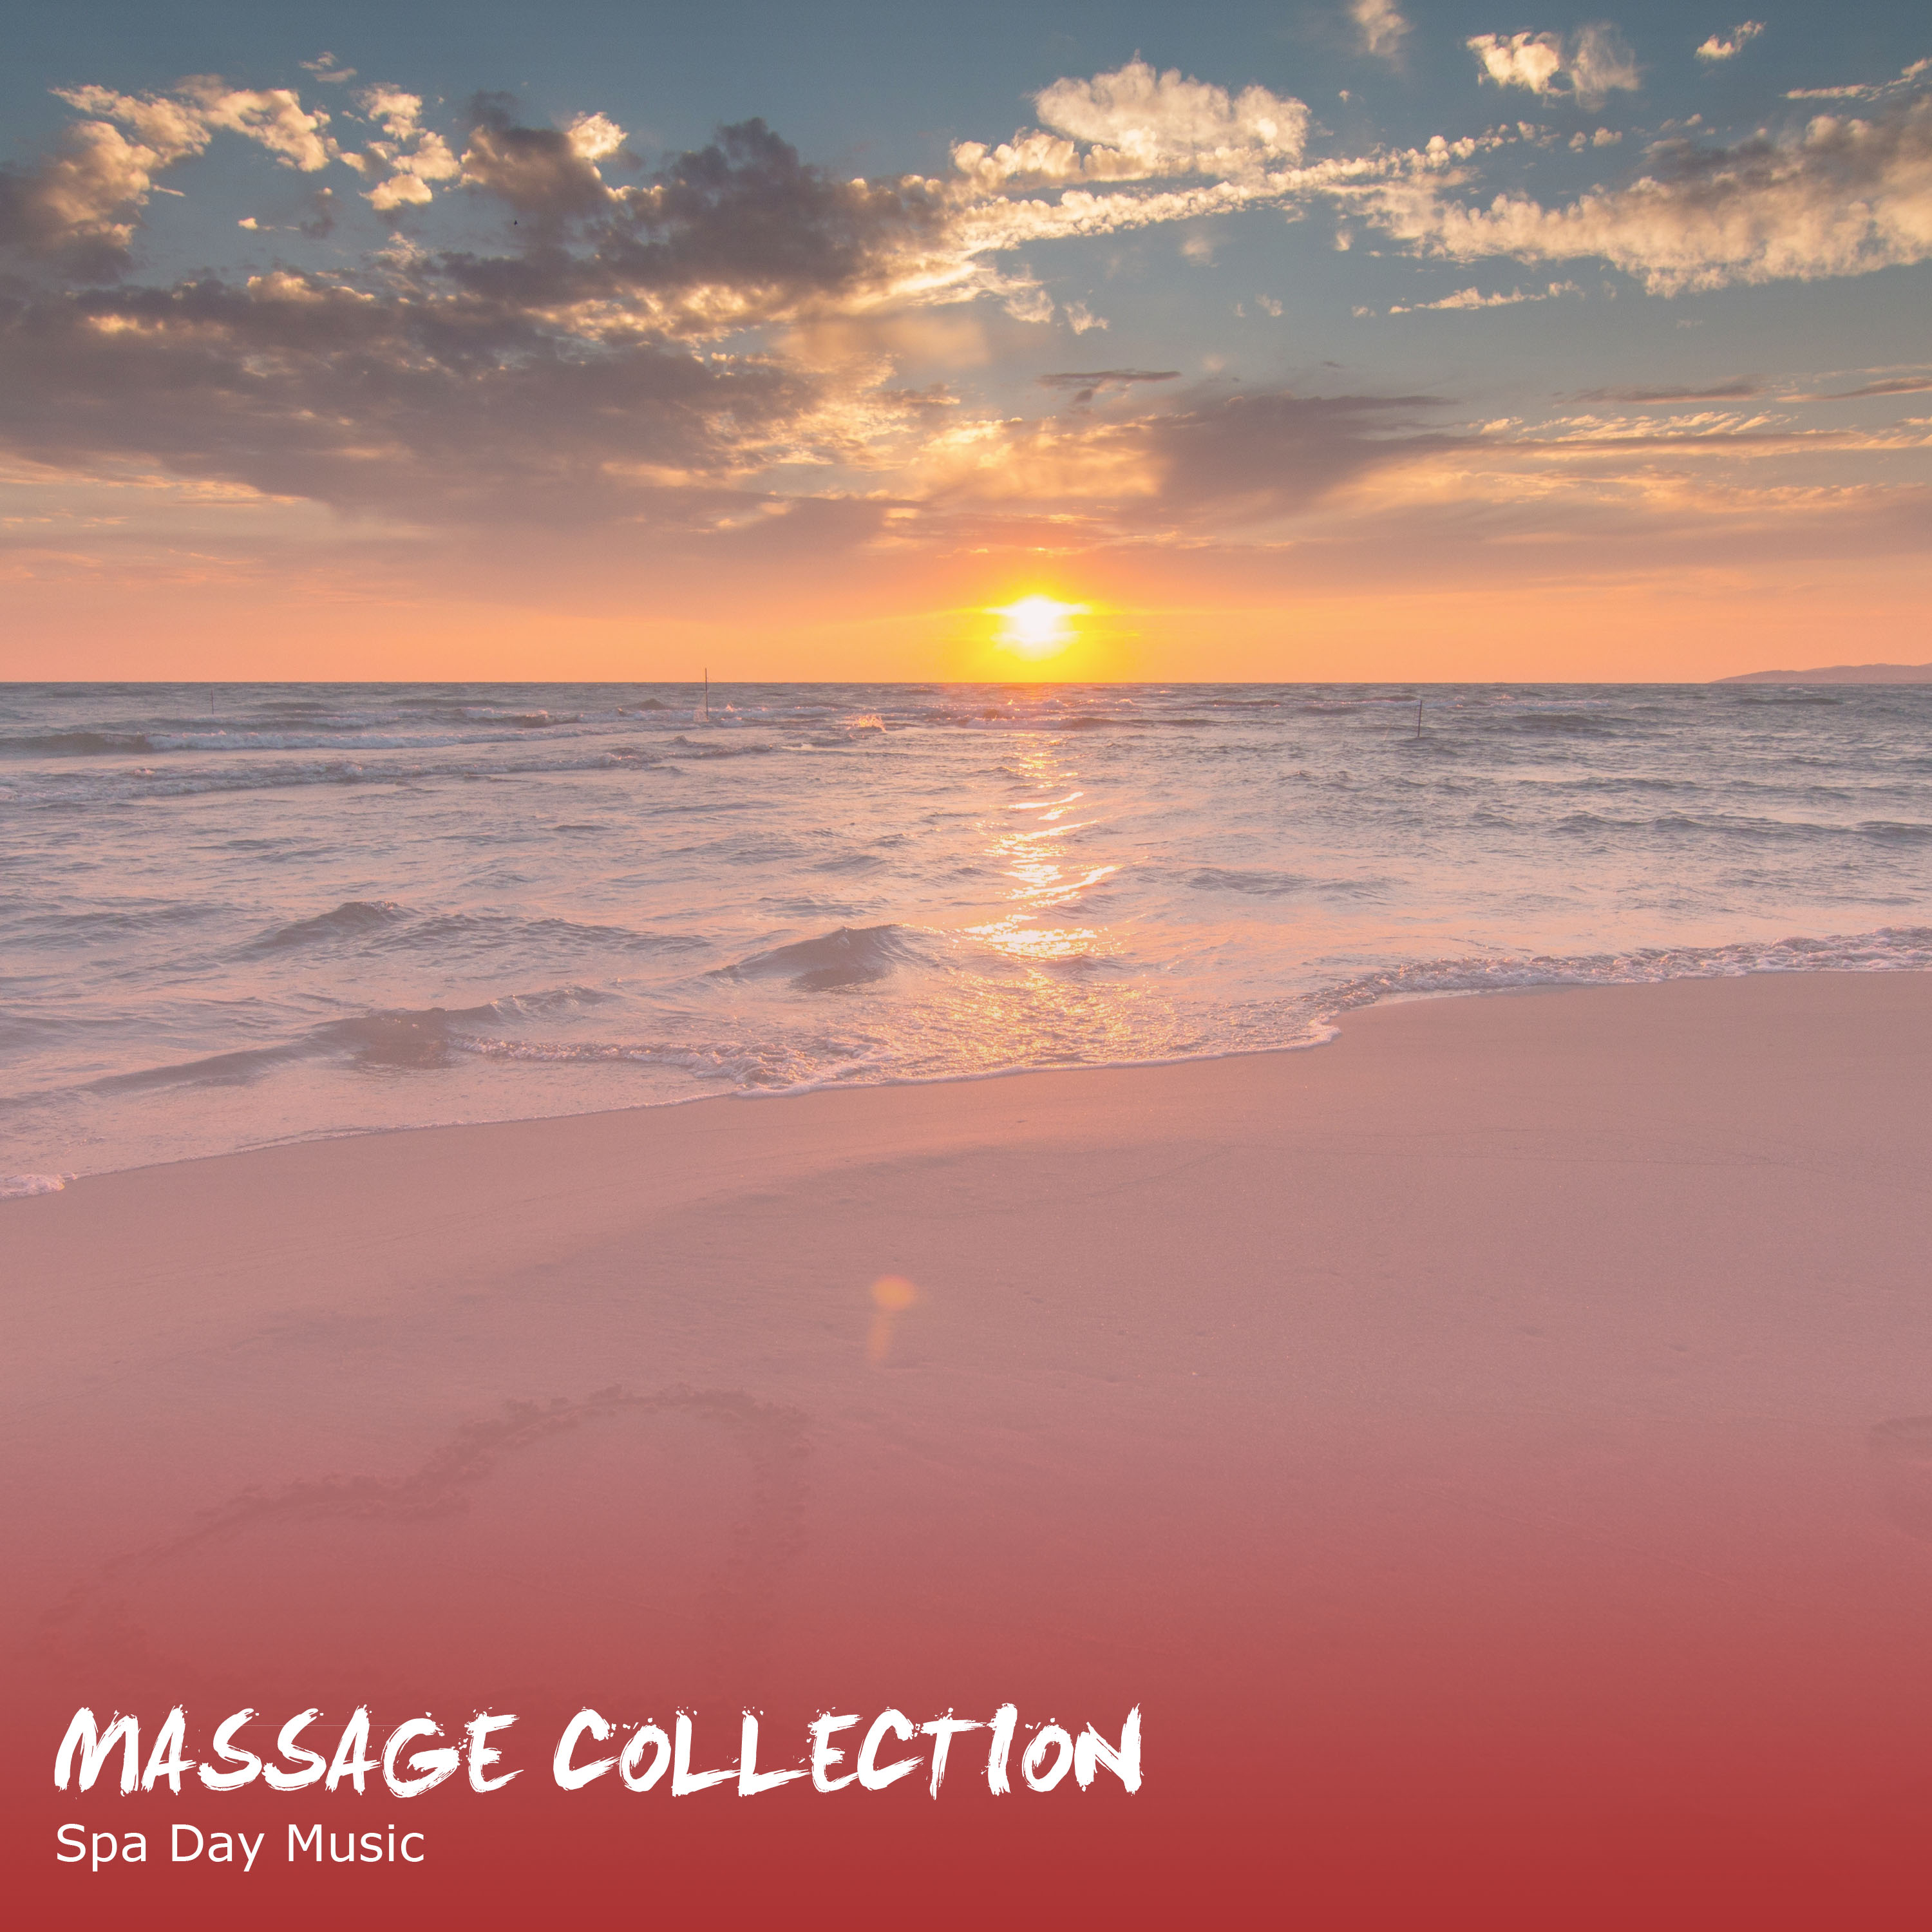 2018 A Massage Collection: Spa Day Music for Relaxation